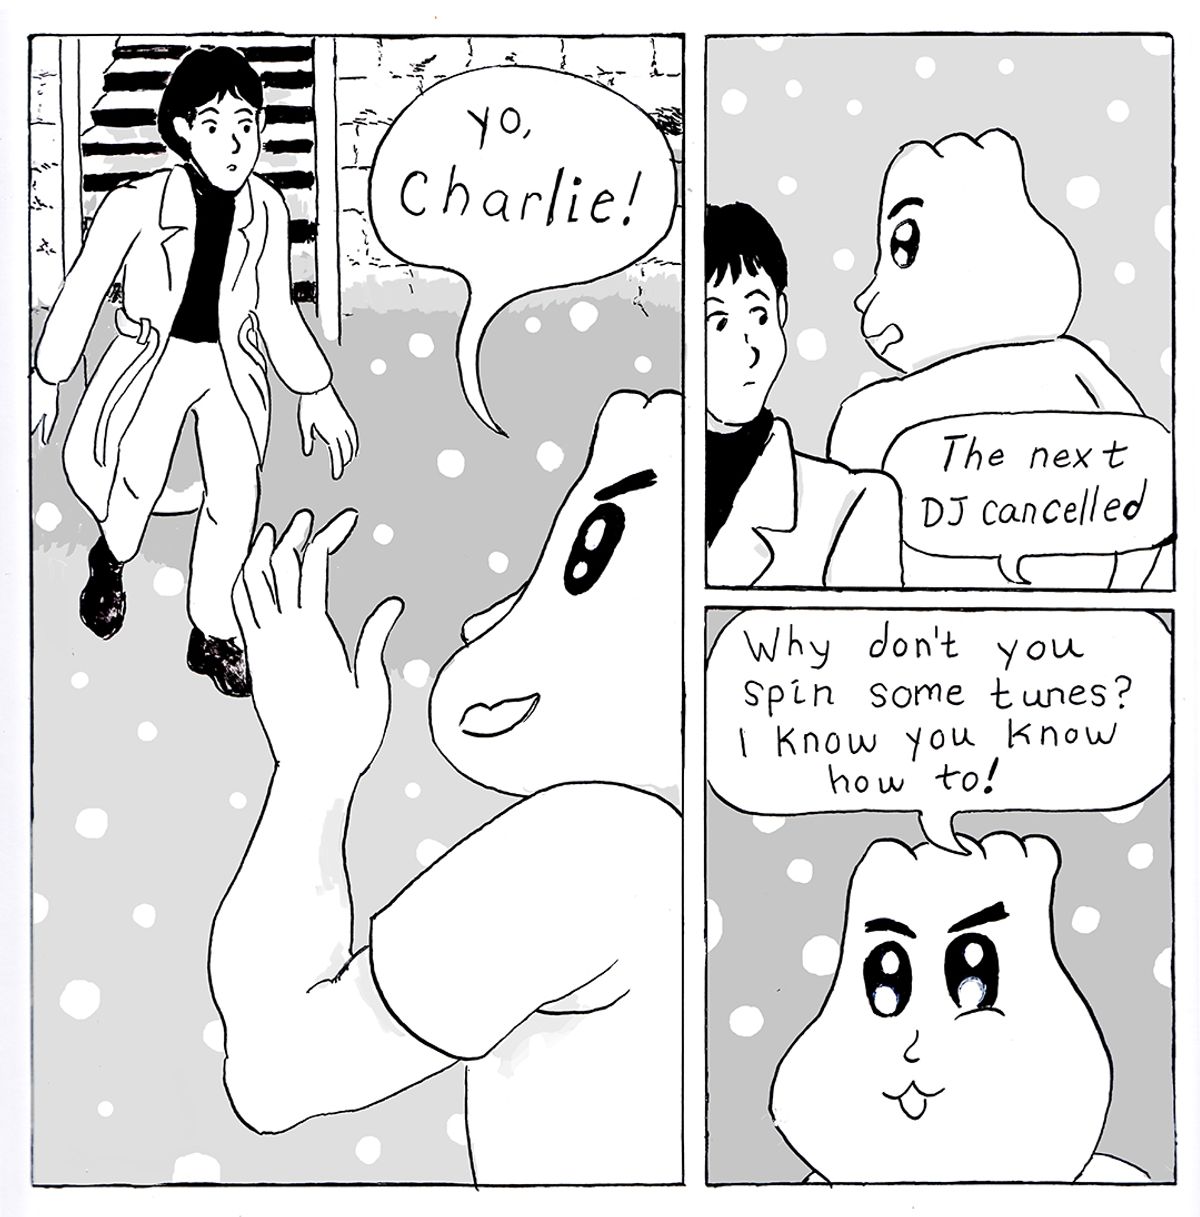 Page 6 - As Charlie walks to the basement where live DJ sets are being played, Stee Mee, the record store owner asks Charlie to play a set : "Yo Charlie! / The Next DJ cancelled / Why dont you spin some tunes? I know you know how to!"